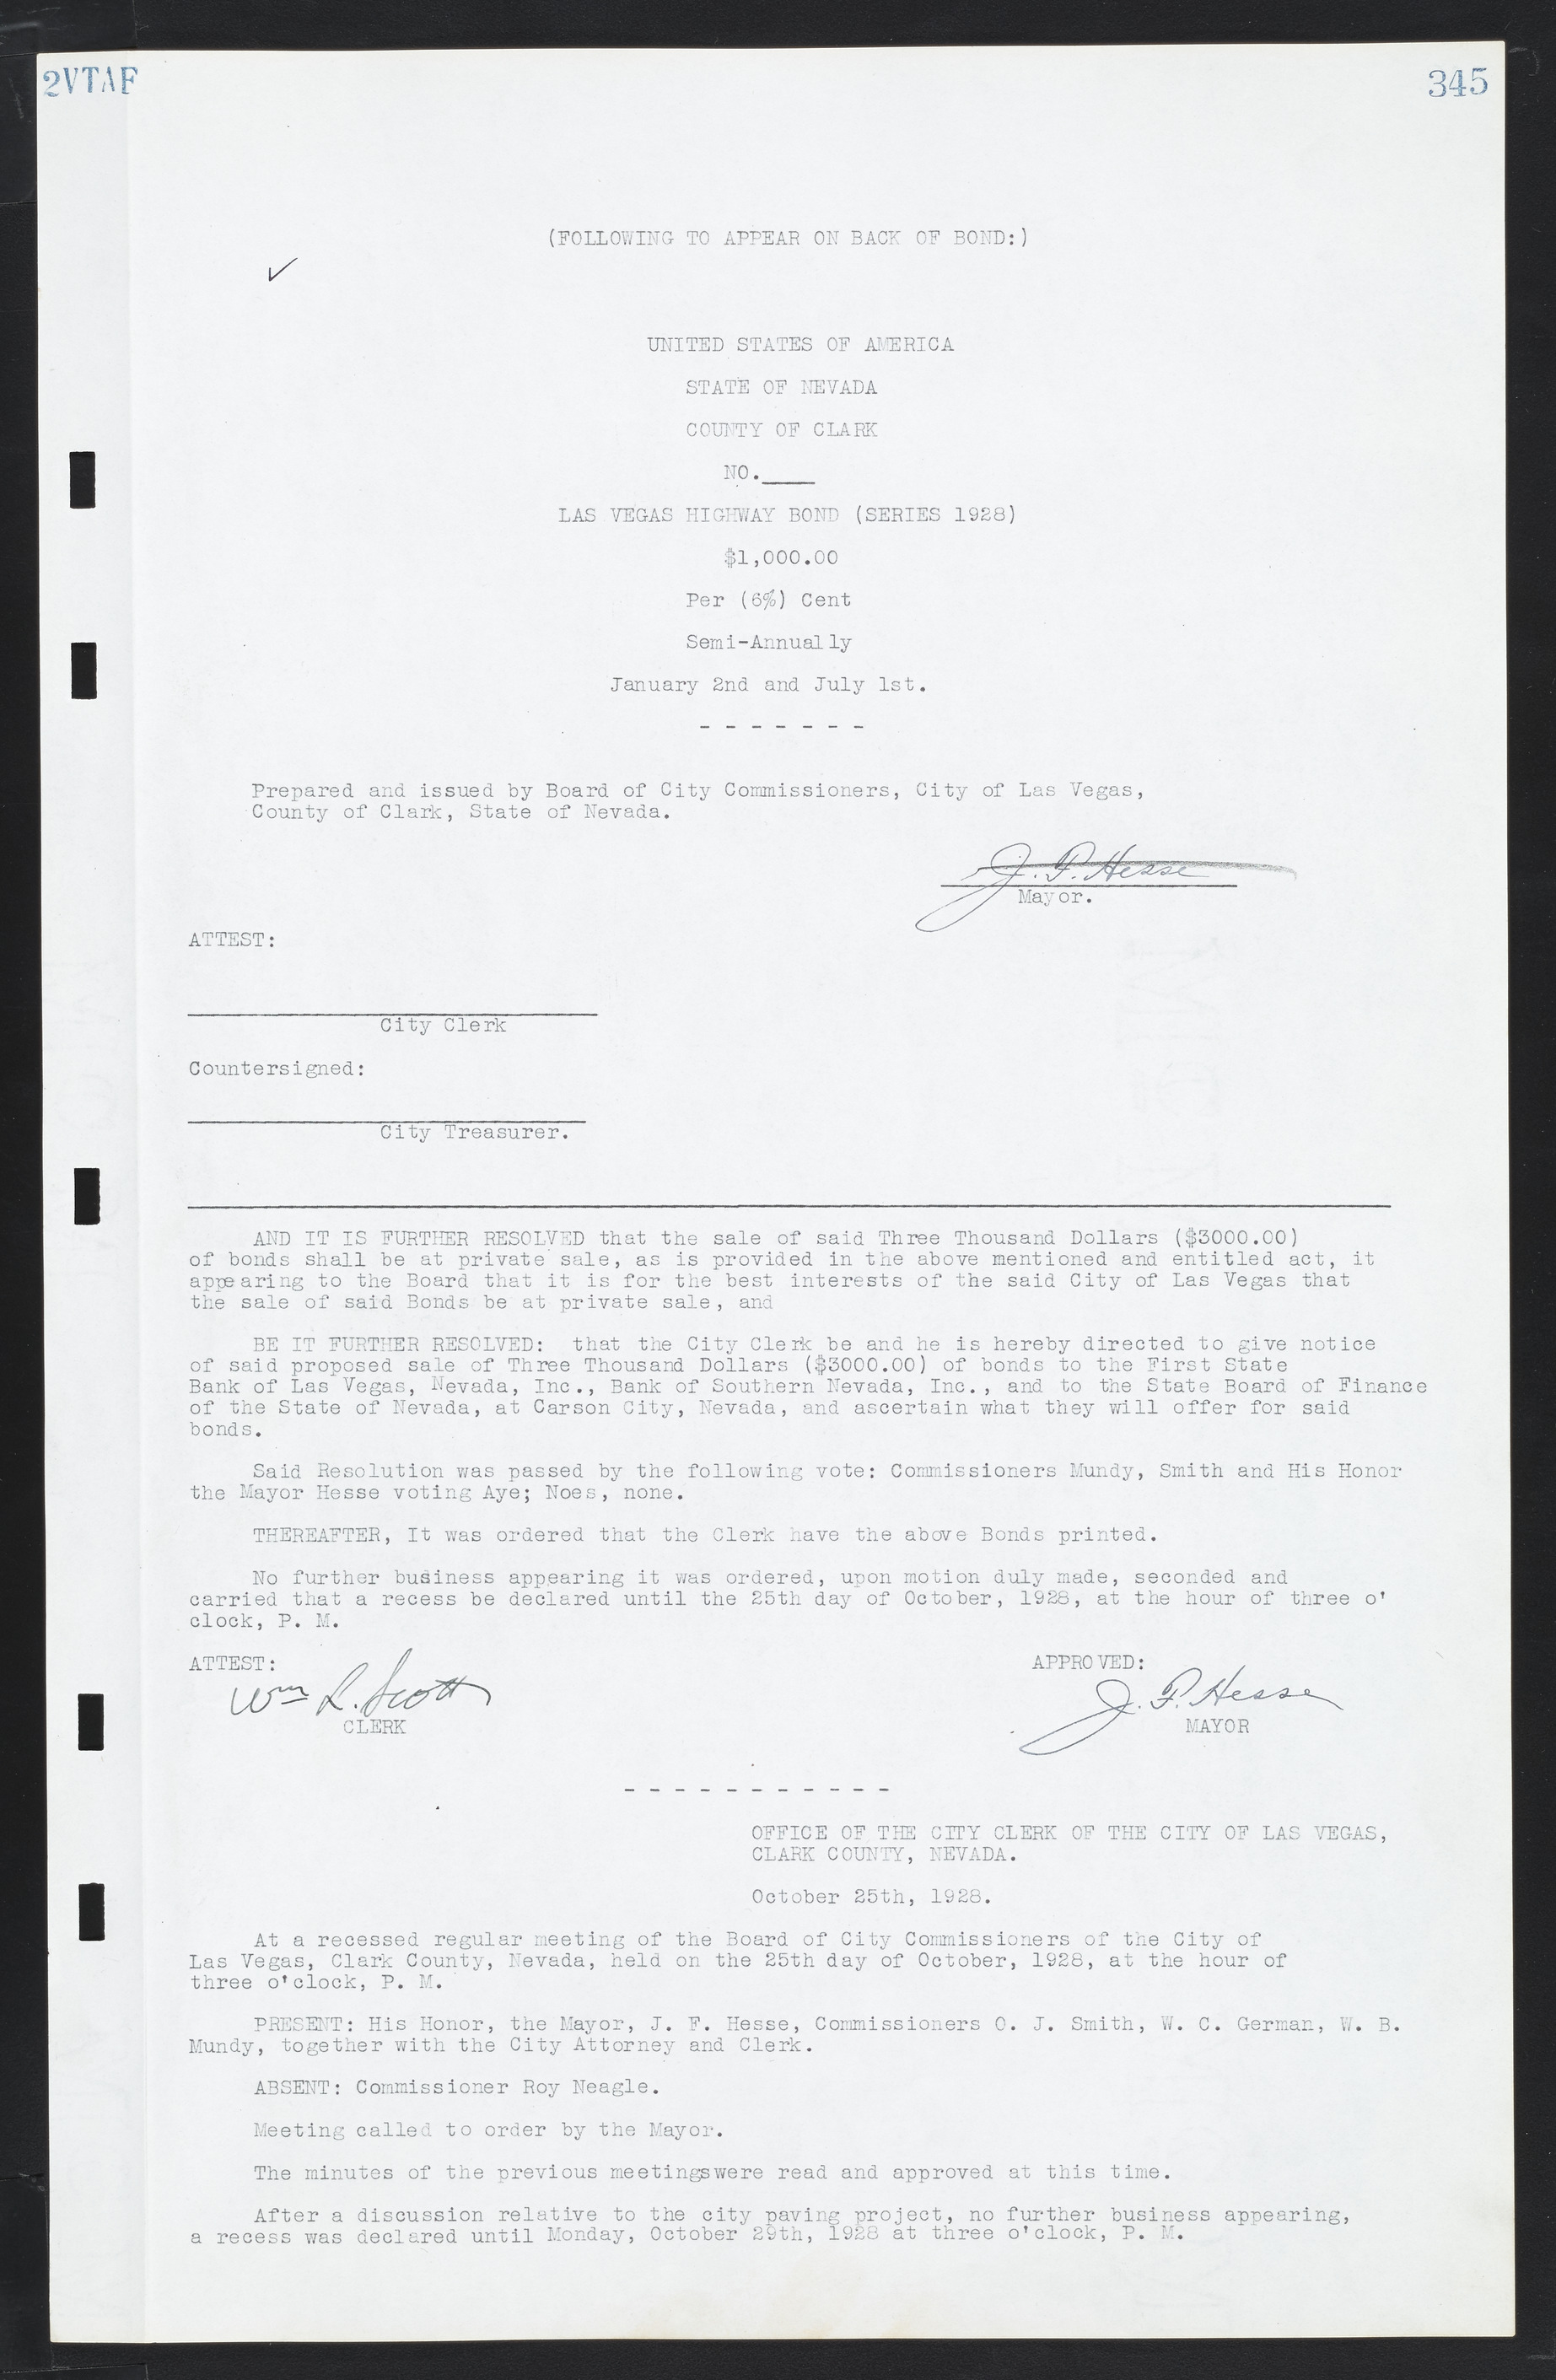 Las Vegas City Commission Minutes, March 1, 1922 to May 10, 1929, lvc000002-354